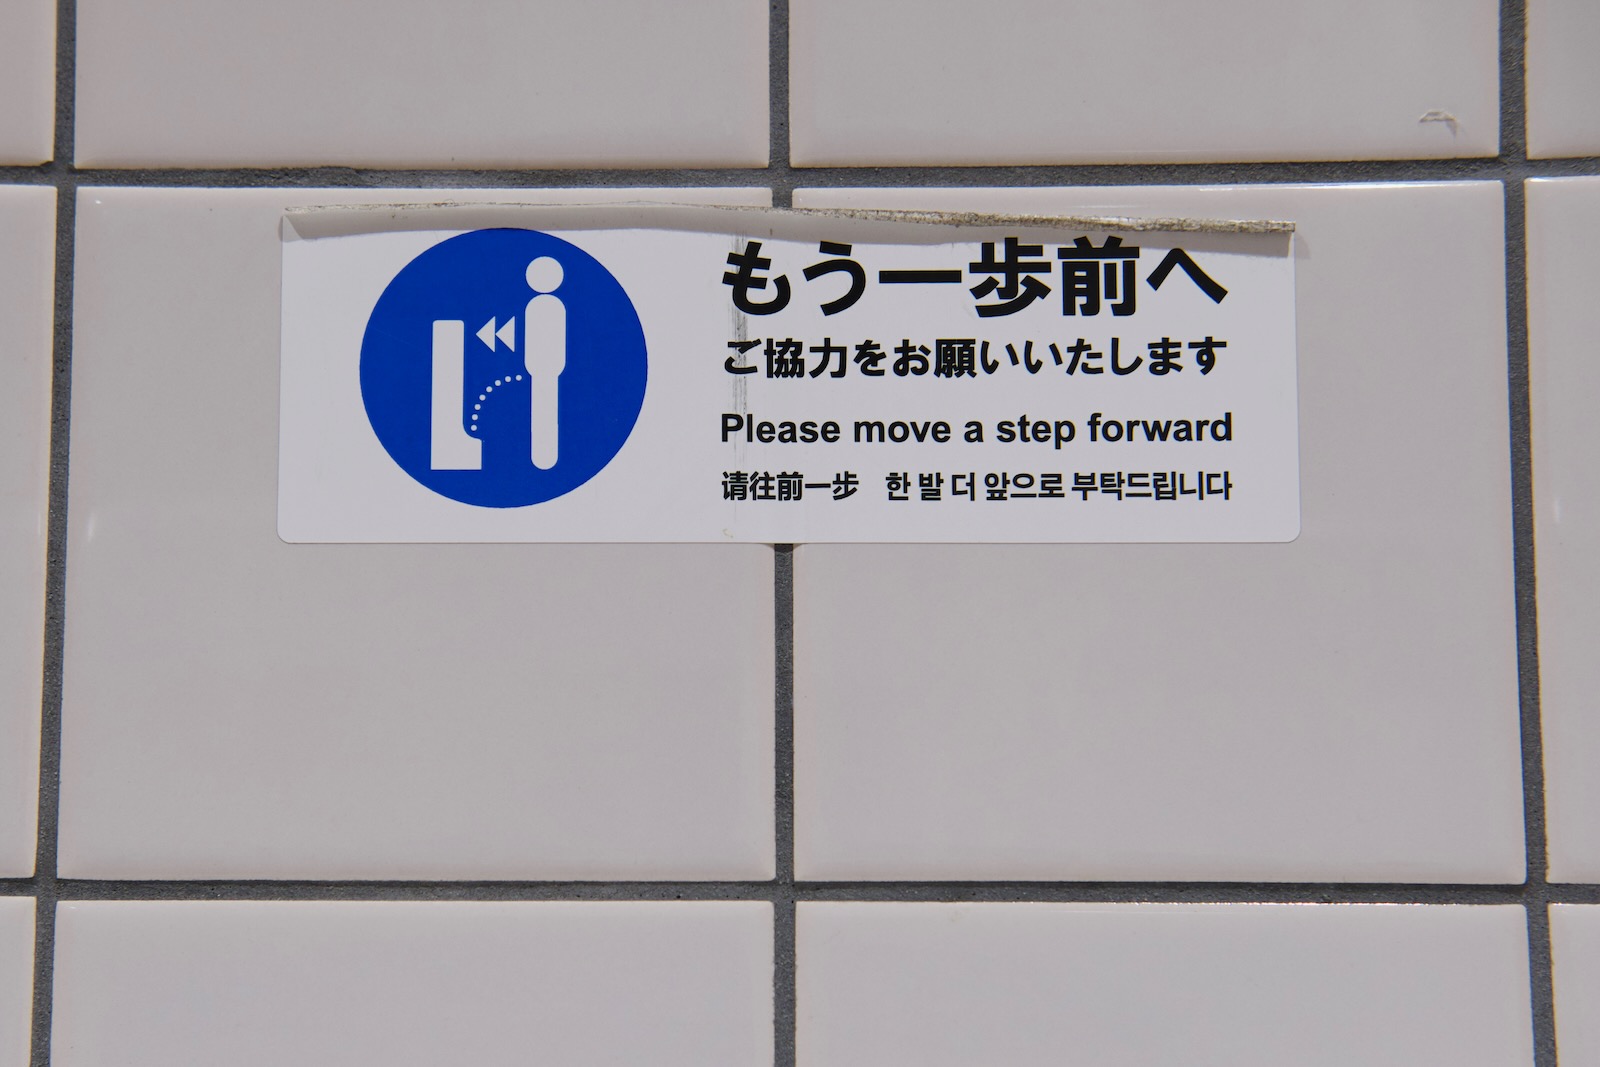 Signage in front of a urinal urging people to step closer.